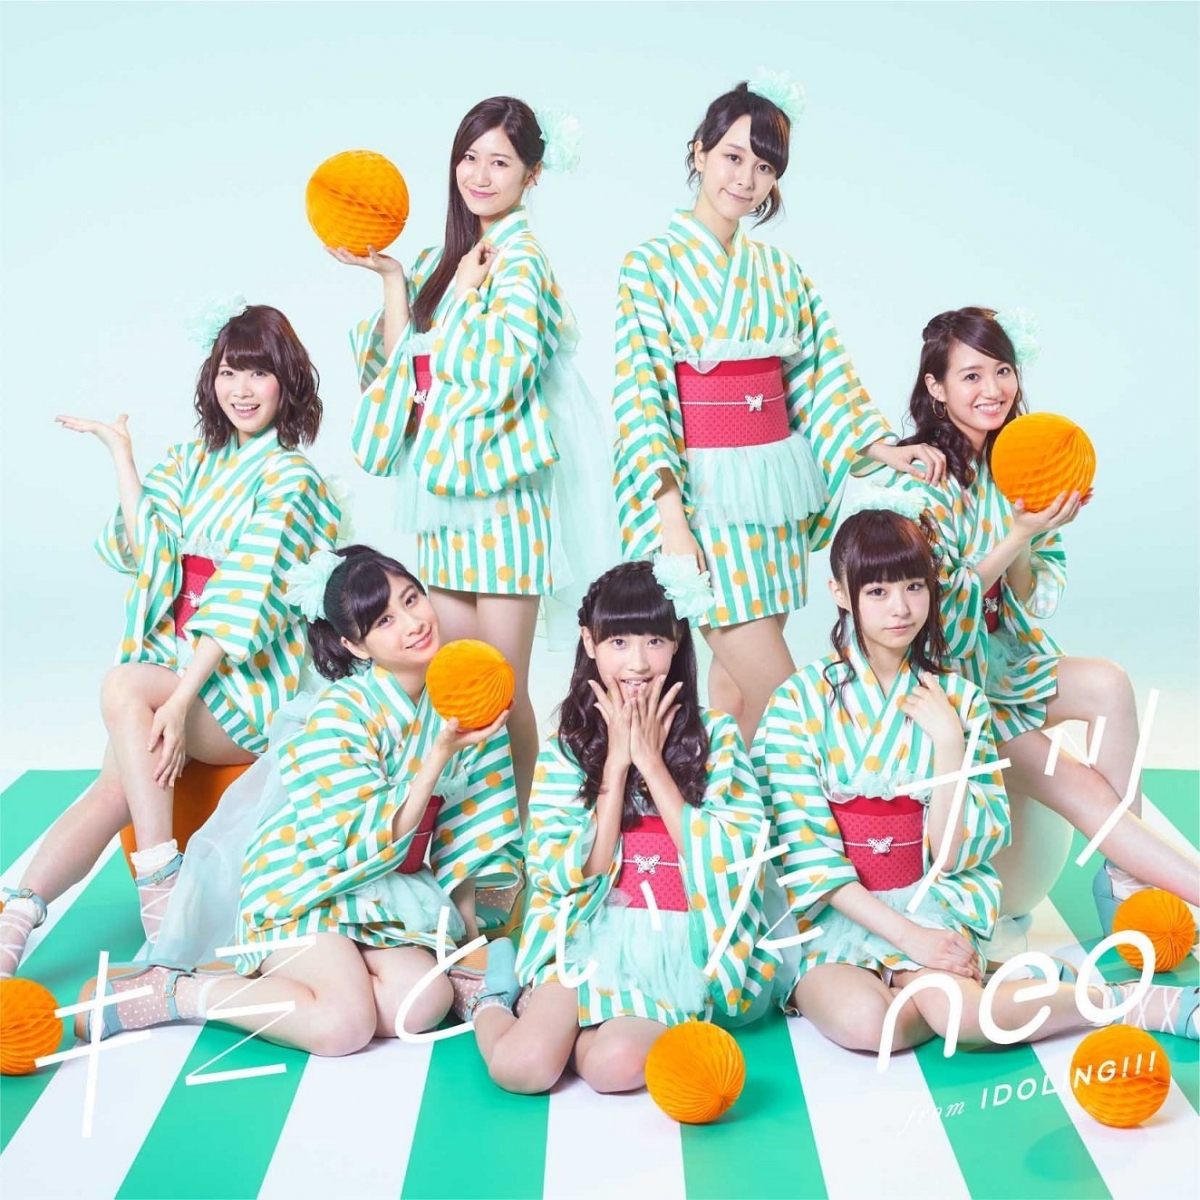 NEO from Idoling!!! Reveals the MV for “Kimi to Ita Natsu” Featuring Sour‐Sweet Scenes of Japanese summer high school girls